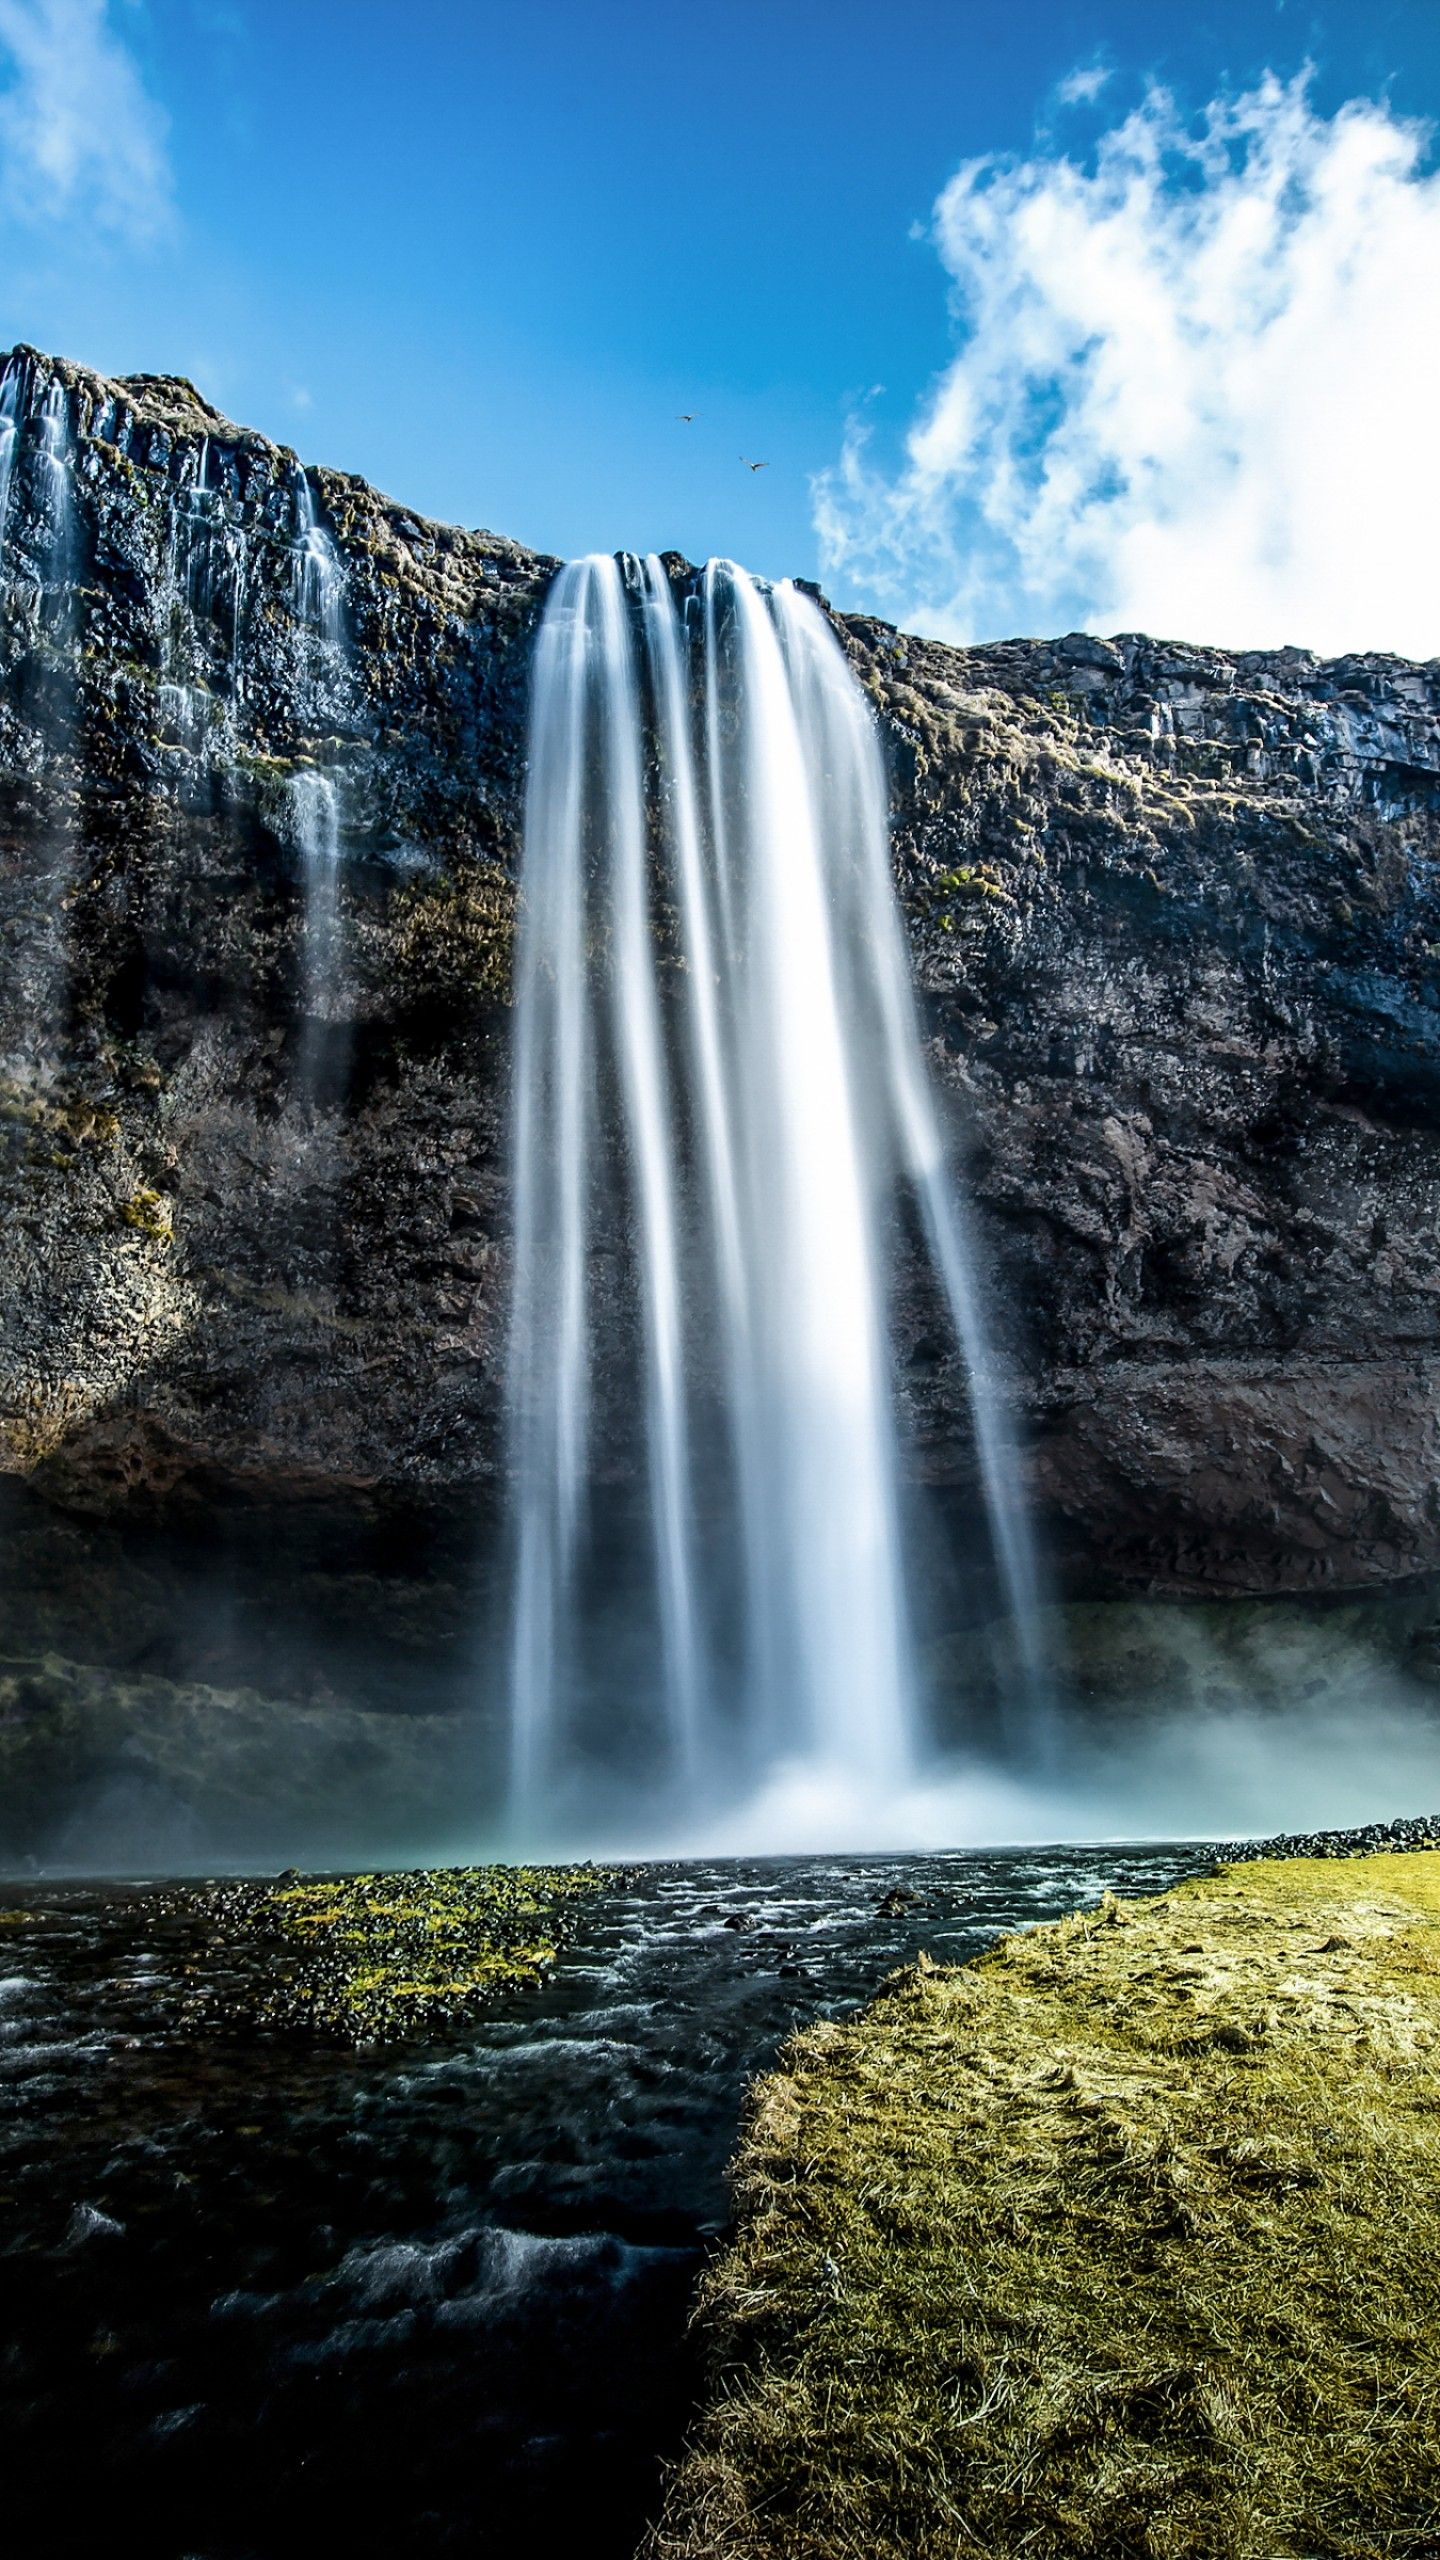 Wallpaper Seljalandsfoss, Waterfall, Iceland, Landscape, 4K, Nature,. Wallpaper for iPhone, Android, Mobile and Desktop